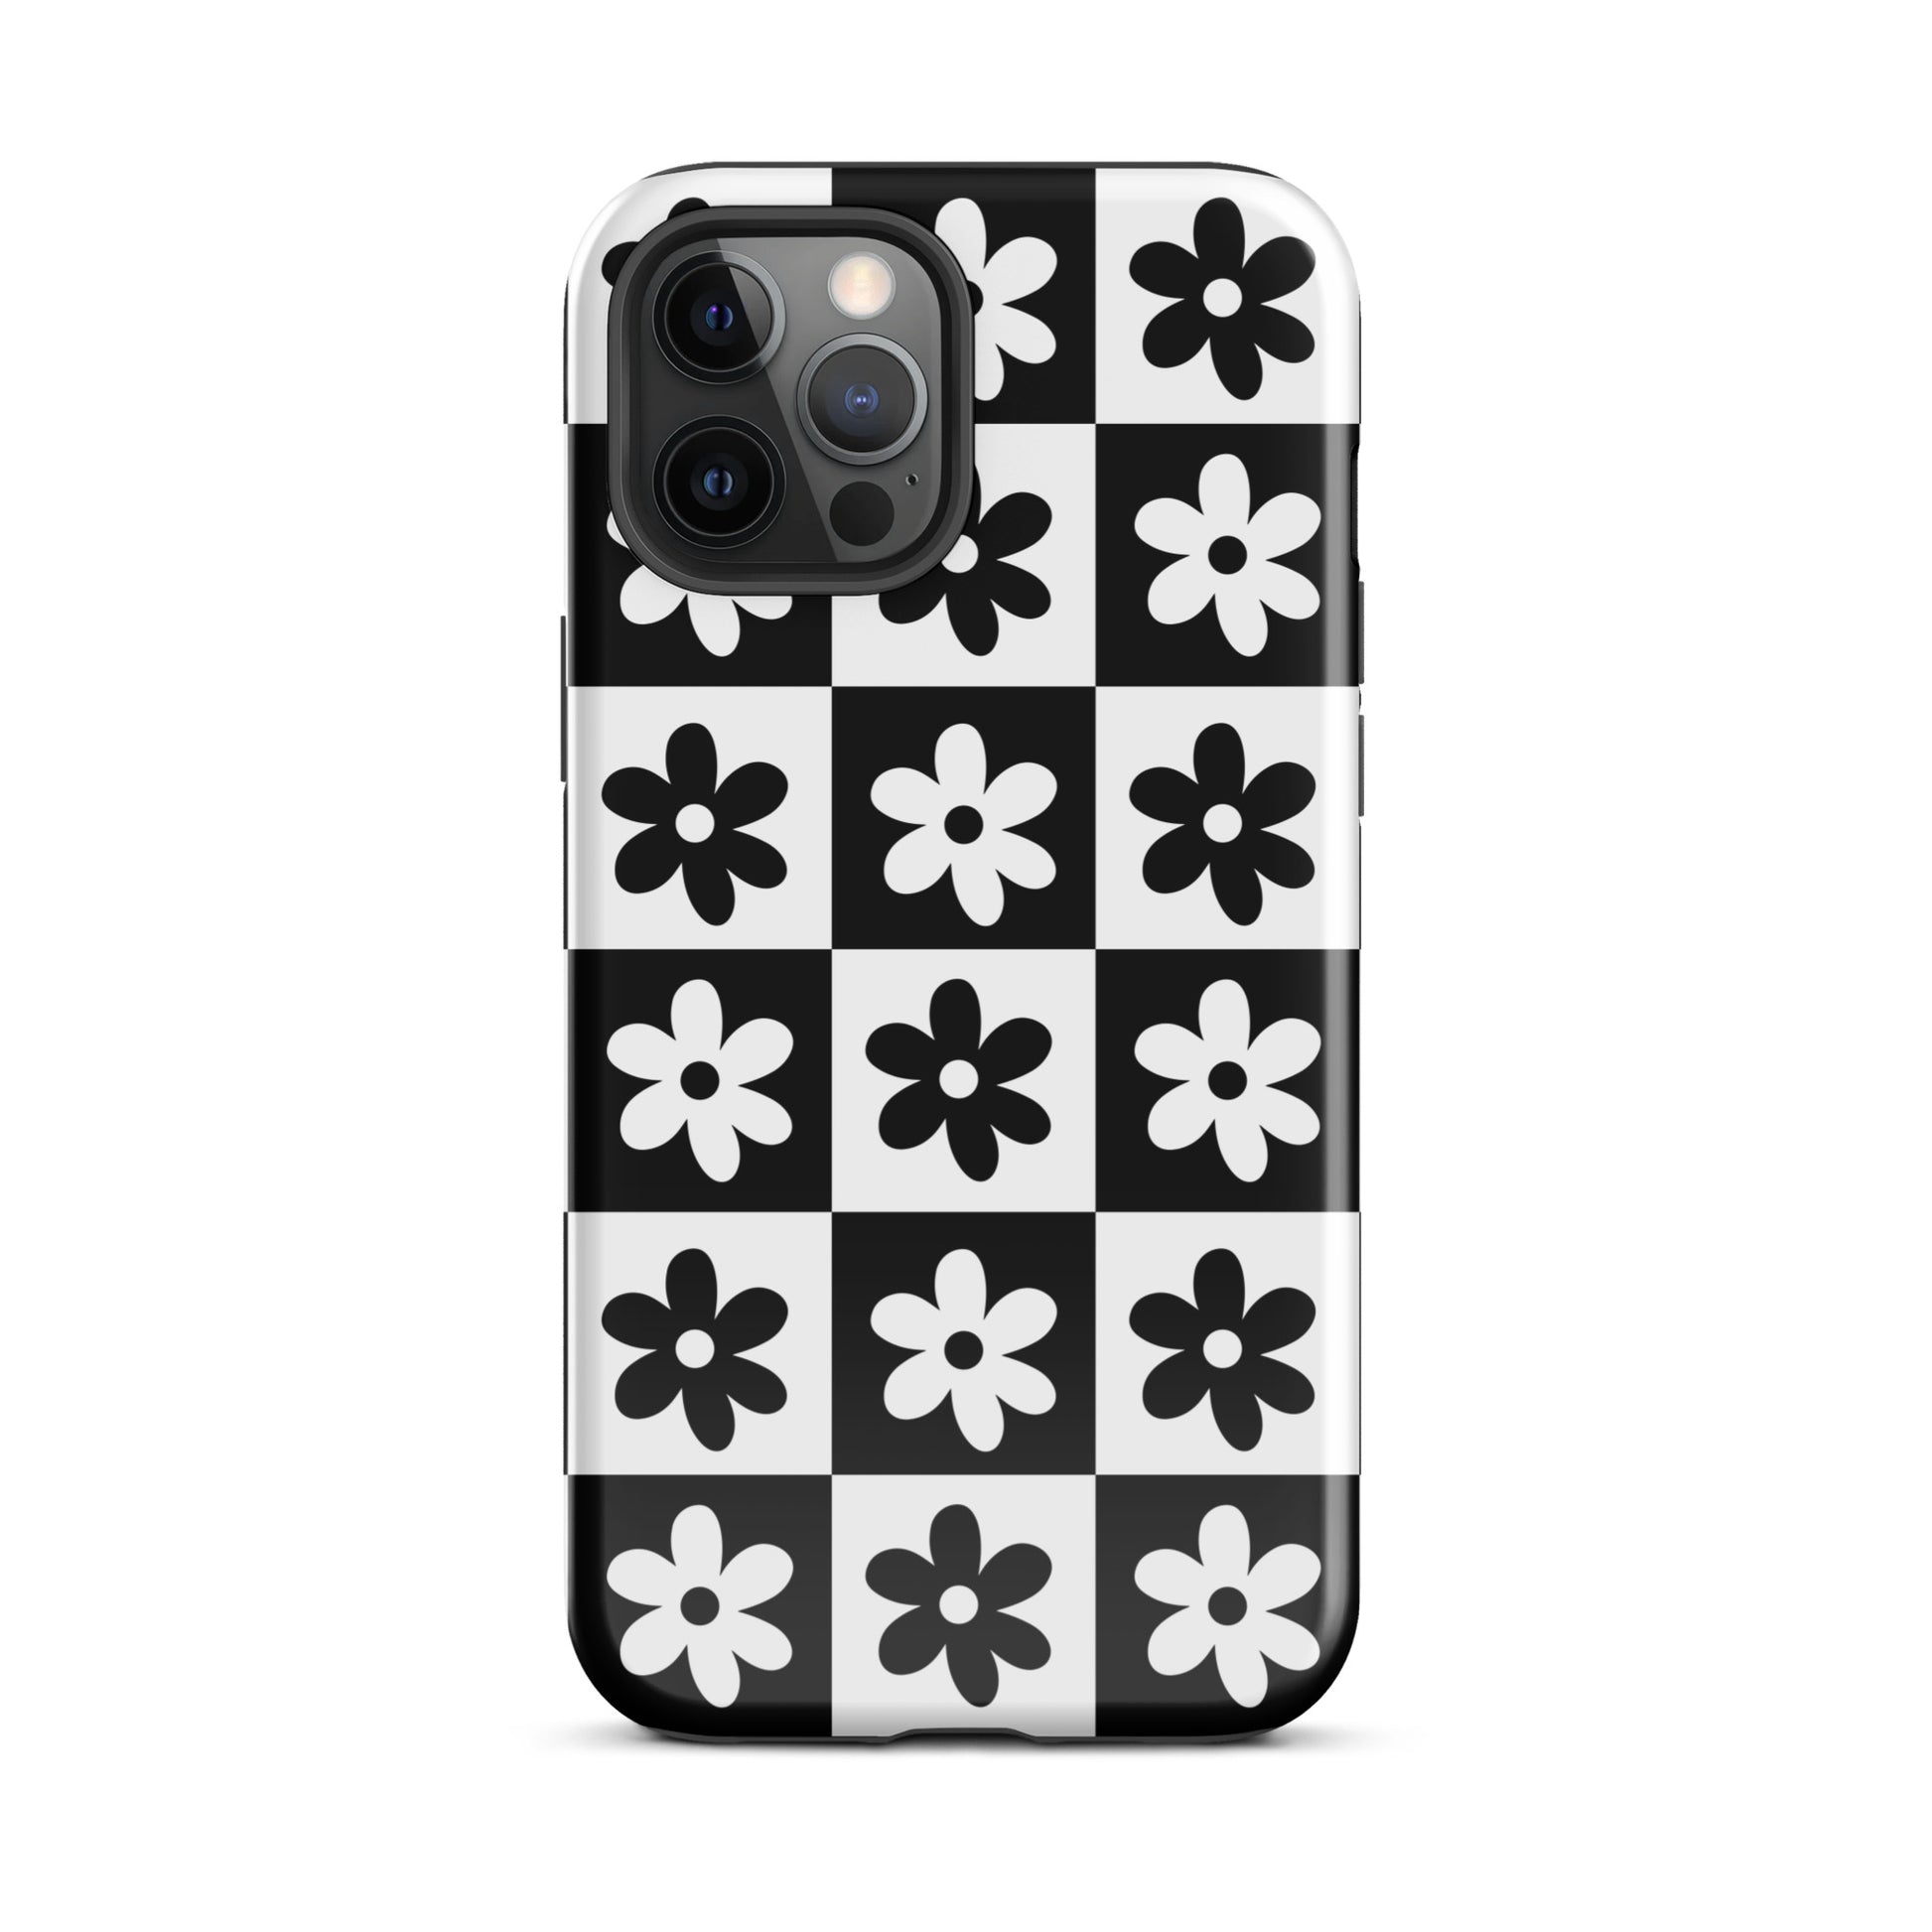 Black & White Garden iPhone Case iPhone 12 Pro Max Glossy